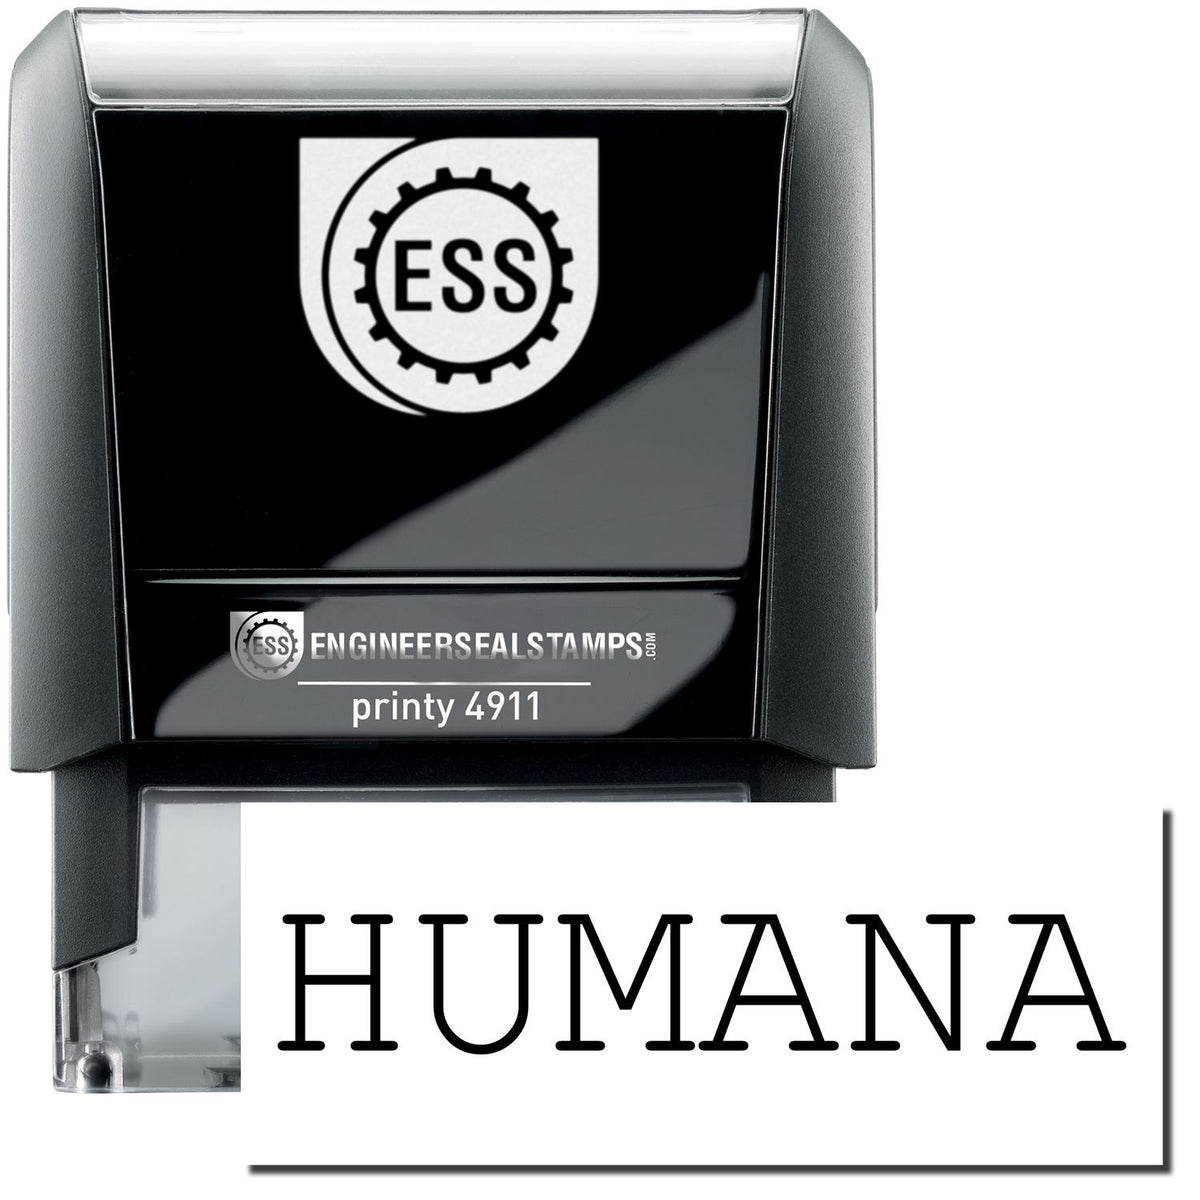 A self-inking stamp with a stamped image showing how the text &quot;HUMANA&quot; is displayed after stamping.